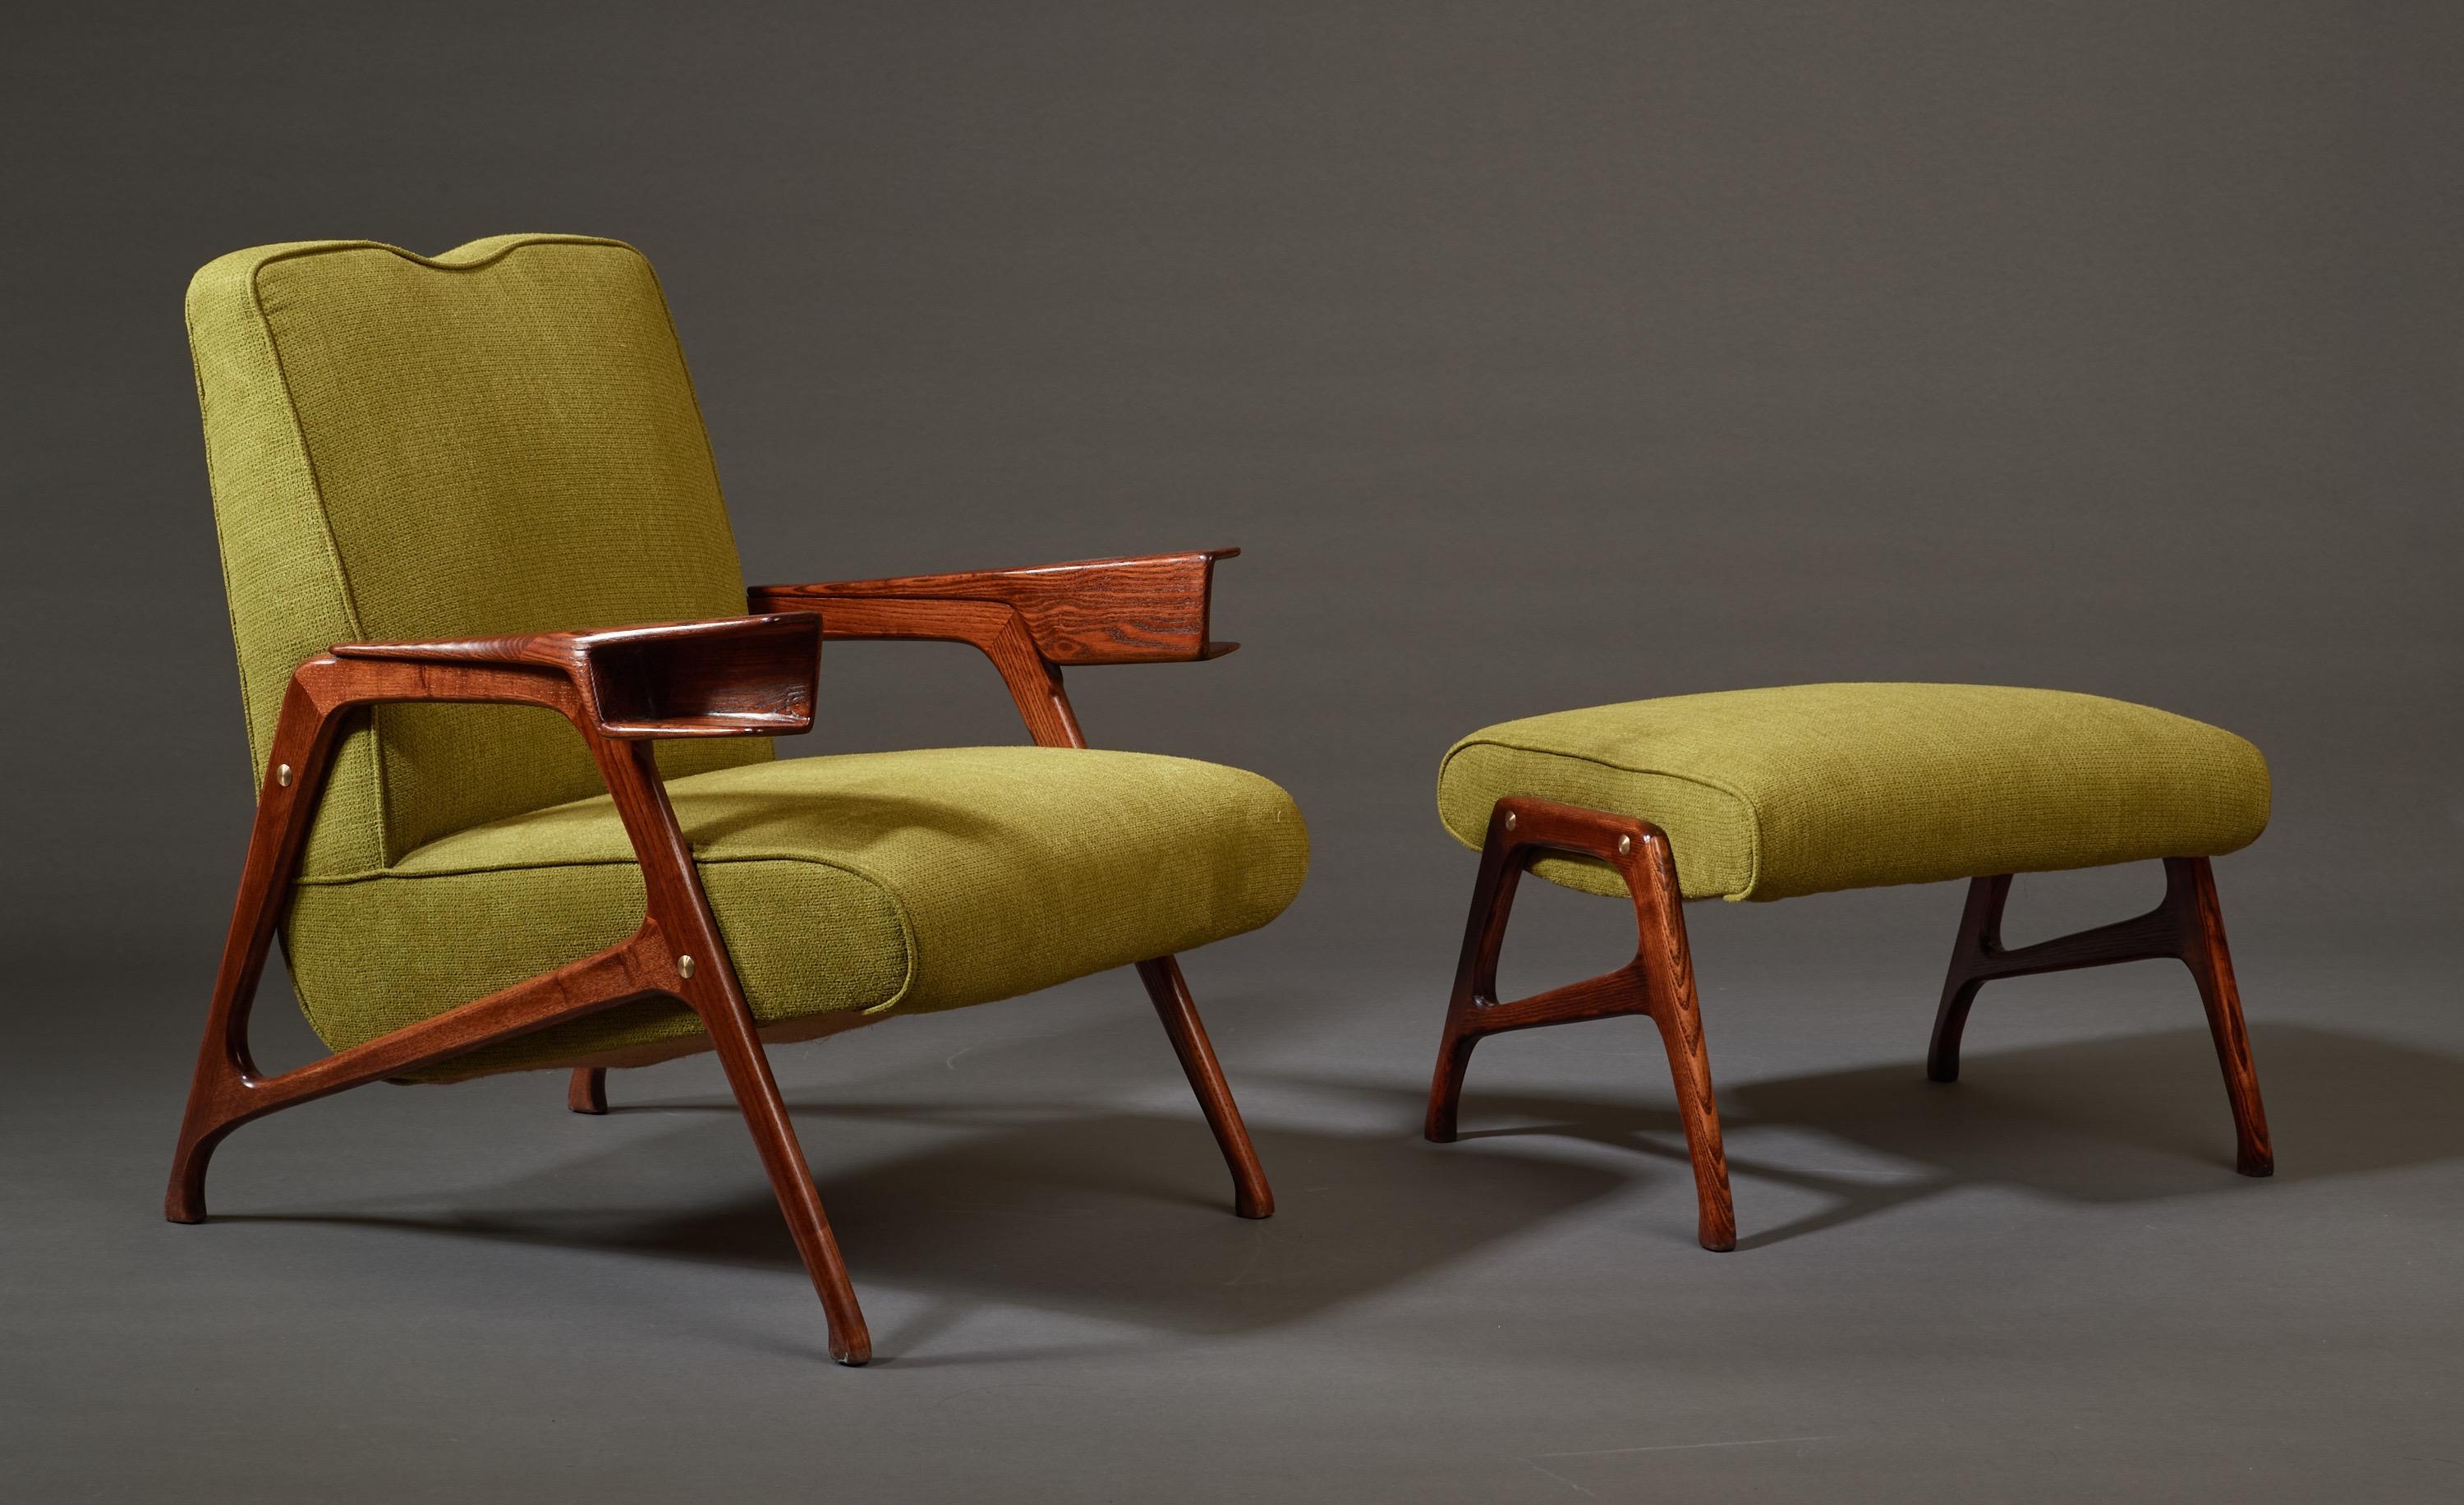 Fabric Augusto Romano, Architectural Mahogany Armchair and Ottoman, Italy, 1950s For Sale